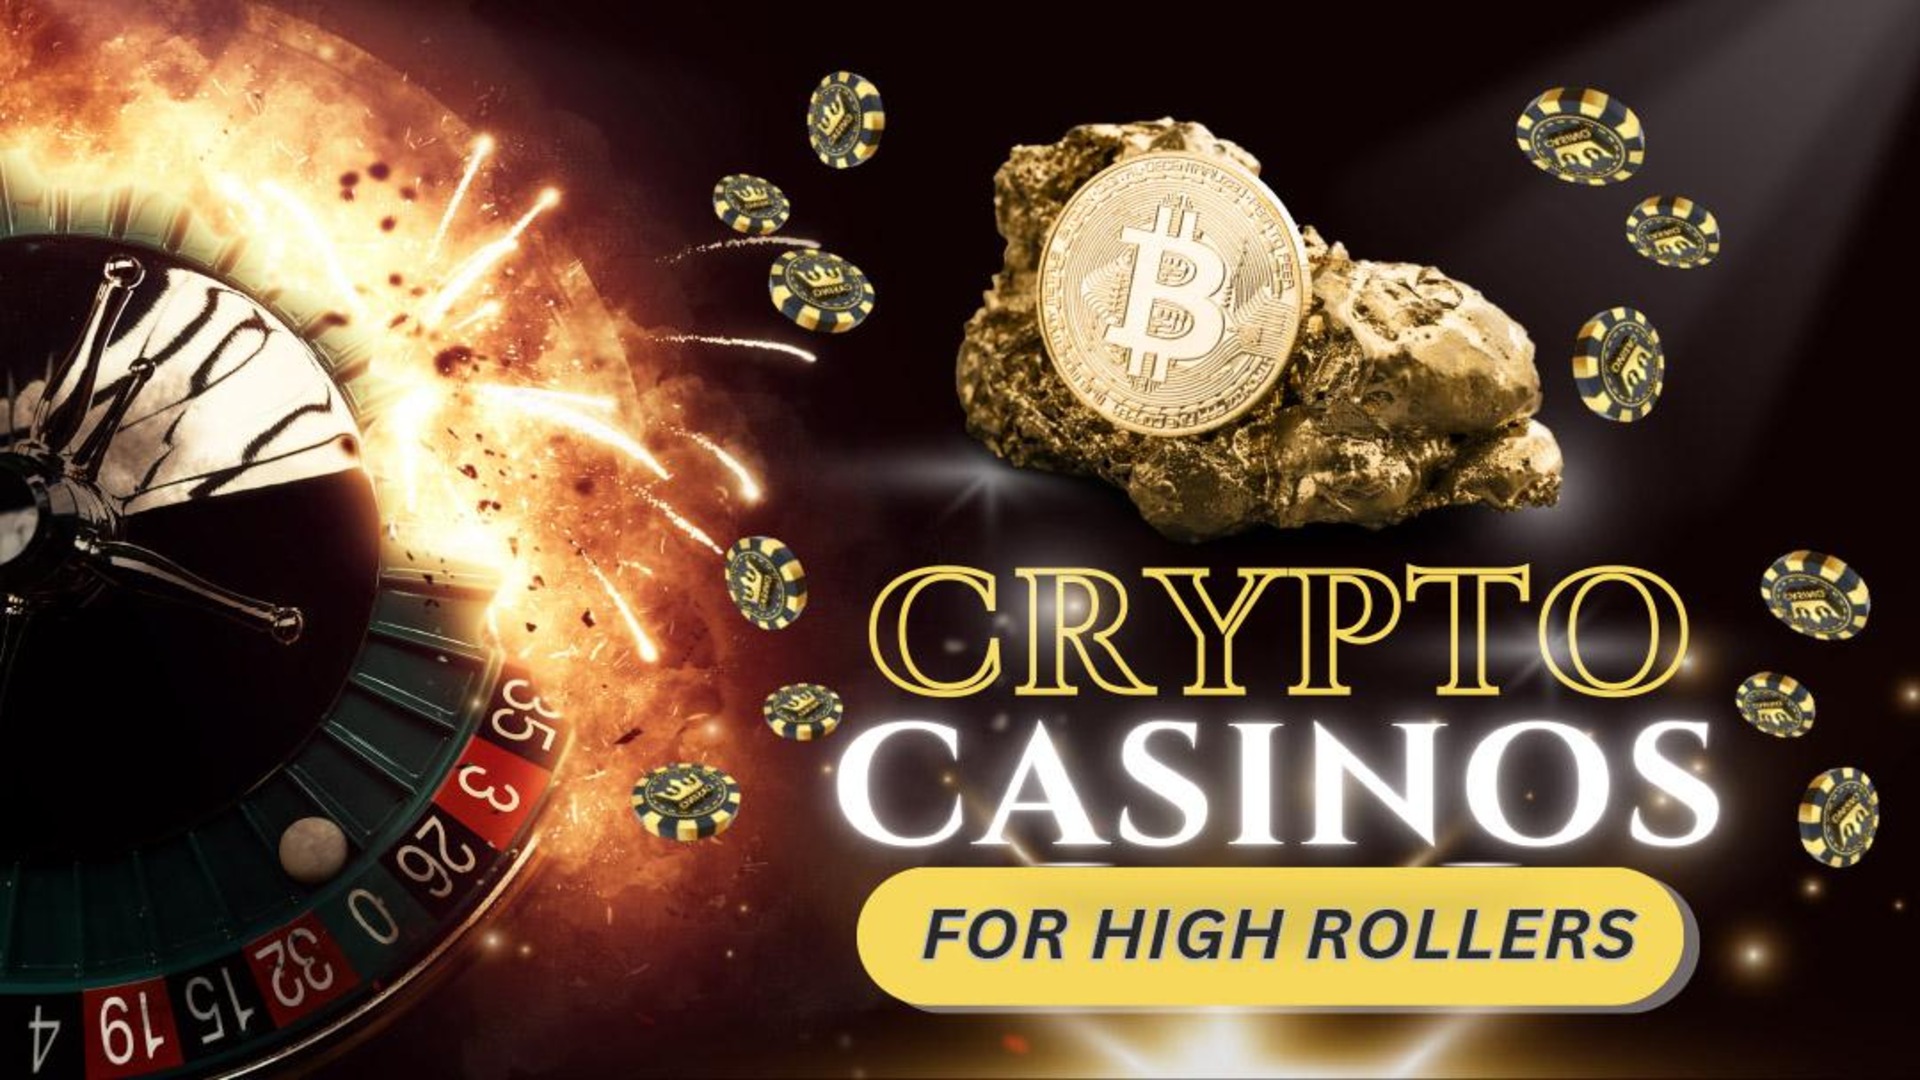 10 Best Crypto Casinos in 2023: Top Bitcoin Casino Sites Ranked by Big Payouts & Bonuses